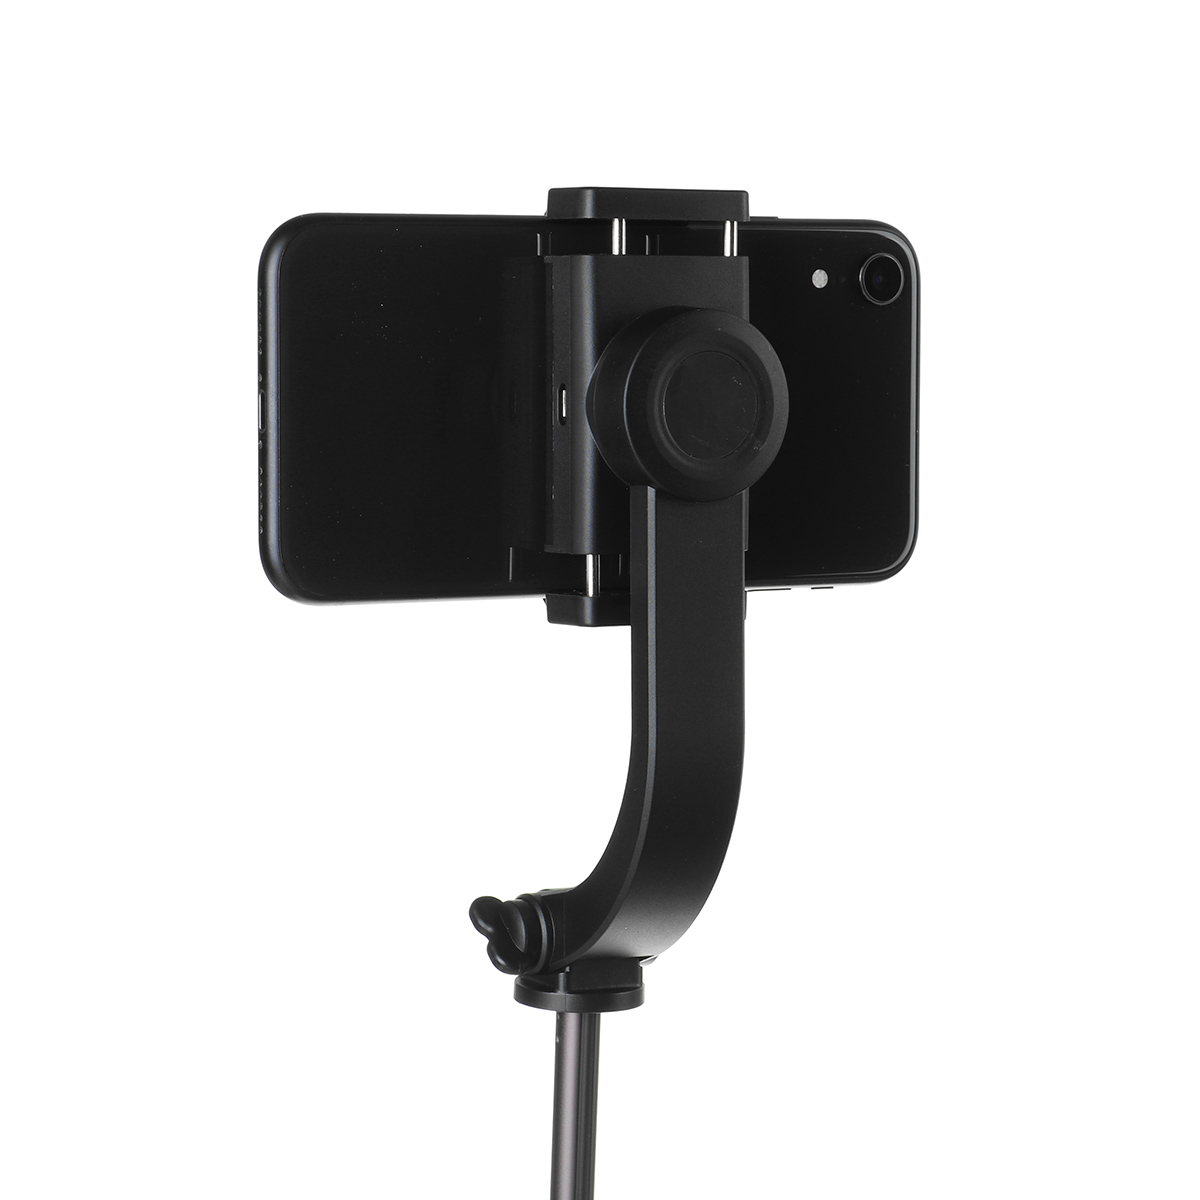 R15-Extended-Telescopic-bluetooth-Wireless-Handheld-Stabilizer-Mobile-Phone-Holder-Stand-for-Outdoor-1822120-10